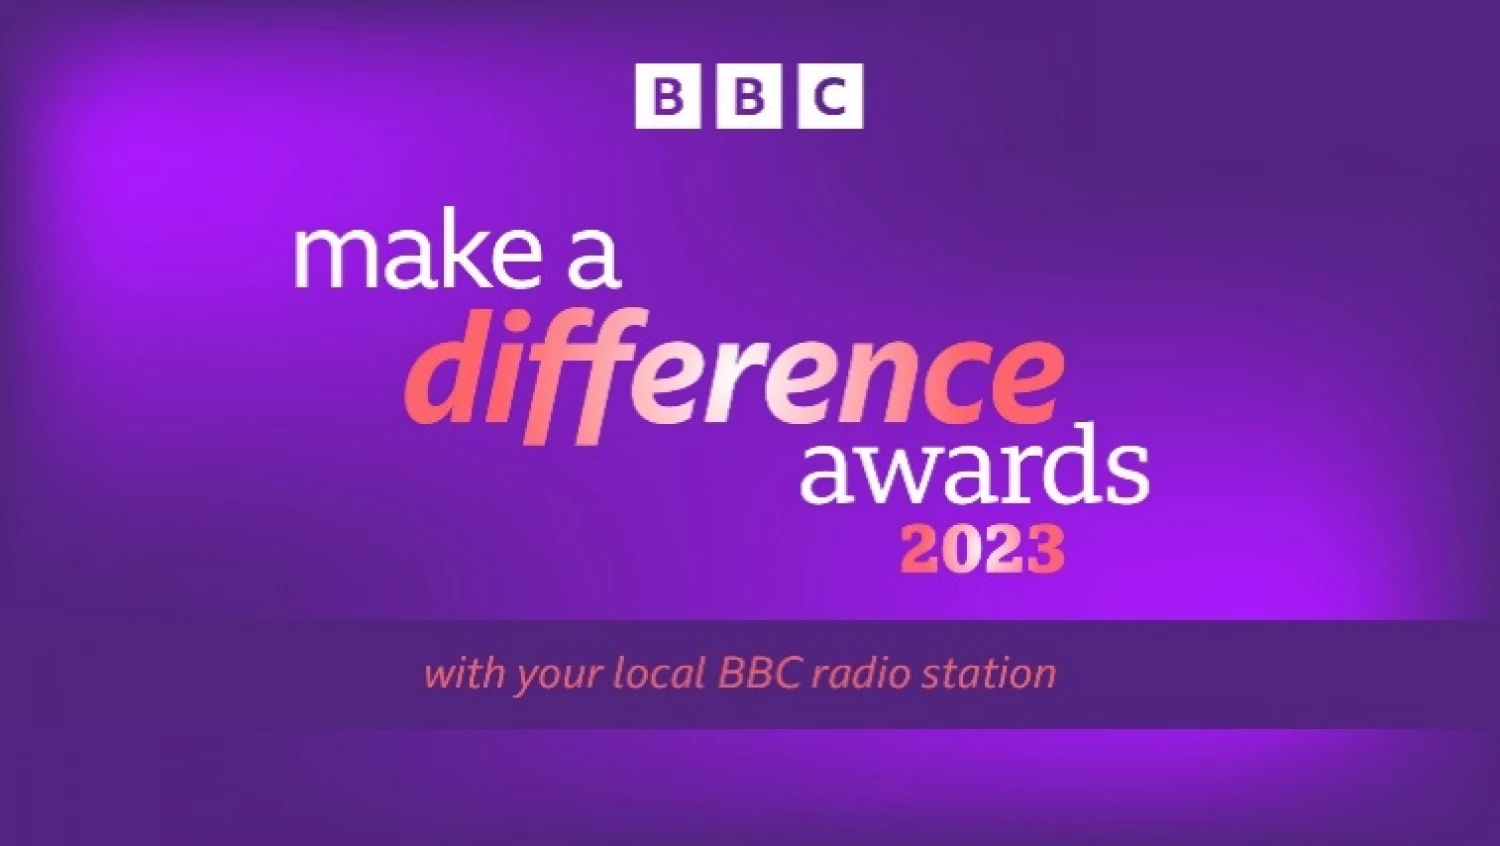 bbc make a difference